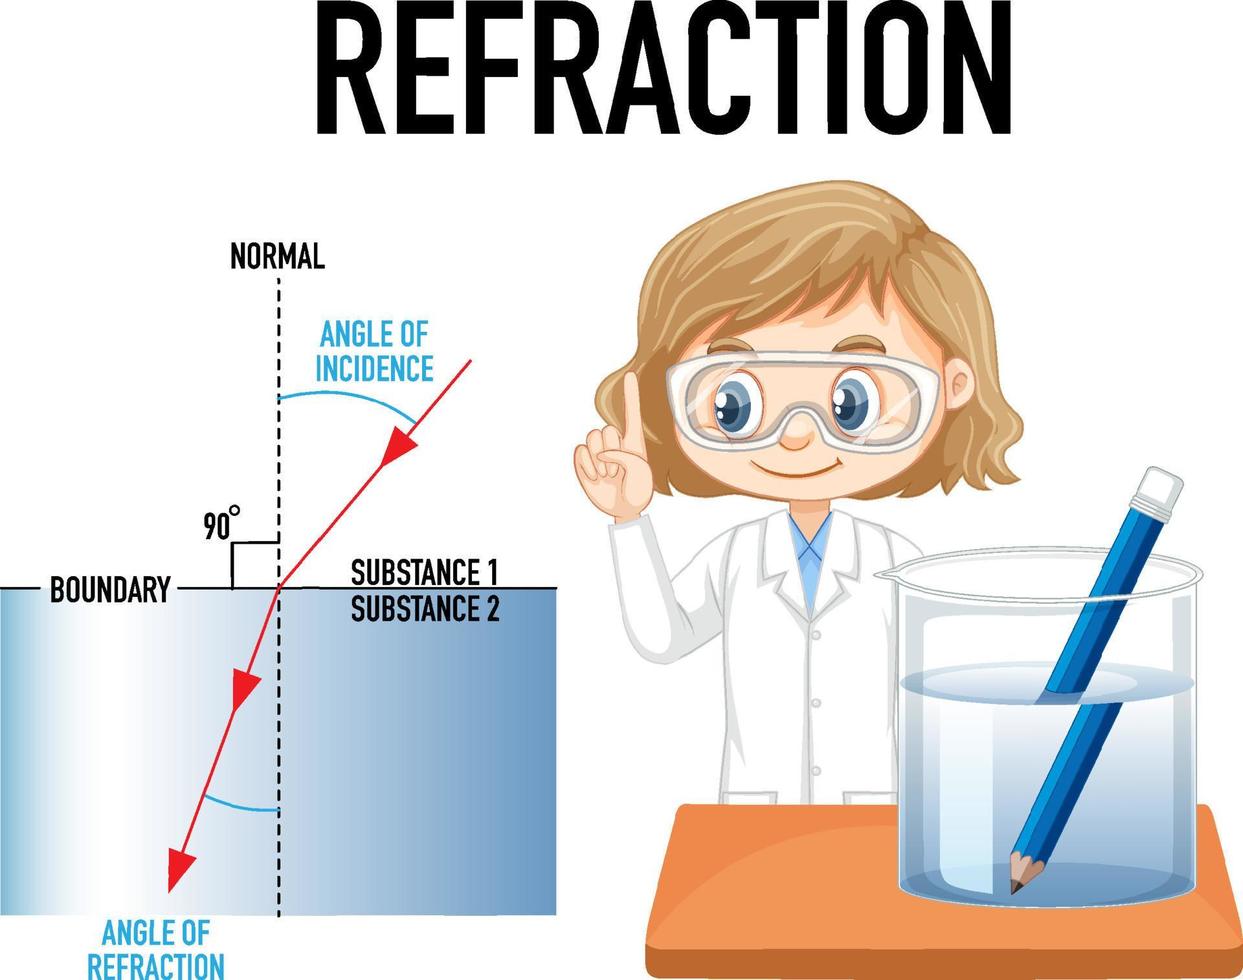 Refraction science experiment for kids concept vector